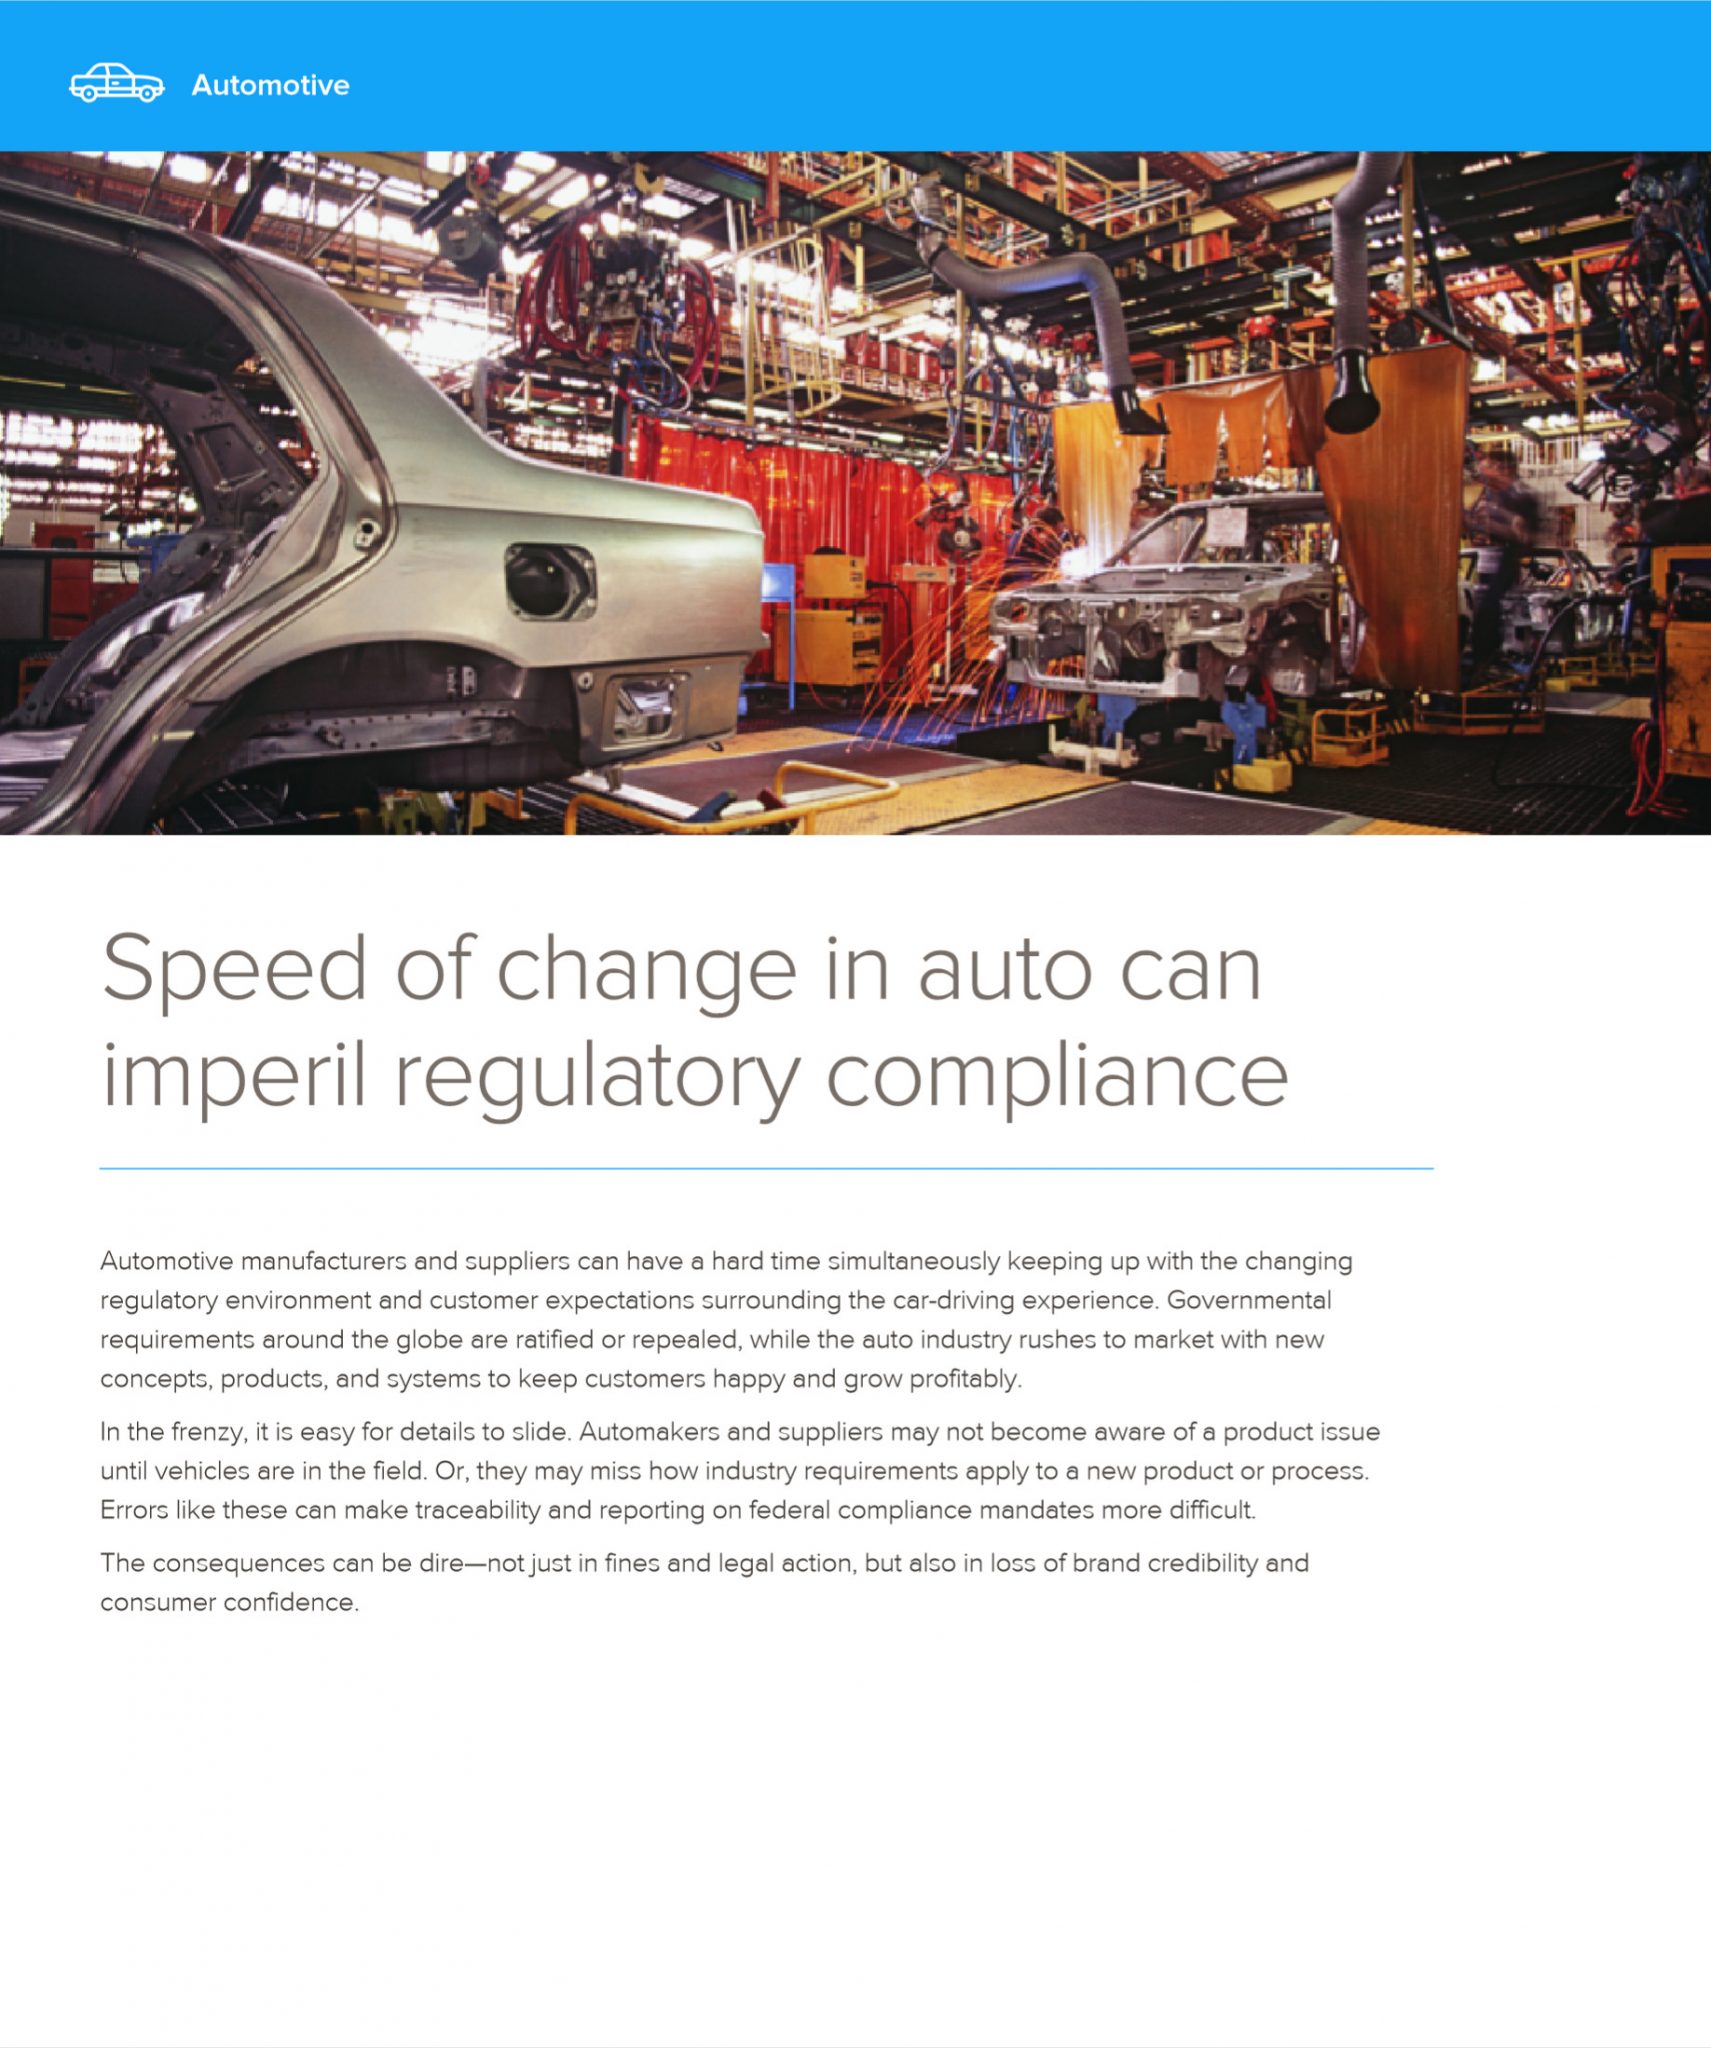 Speed of Change in Automotive Manufacturing Can Imperil Regulatory Compliance